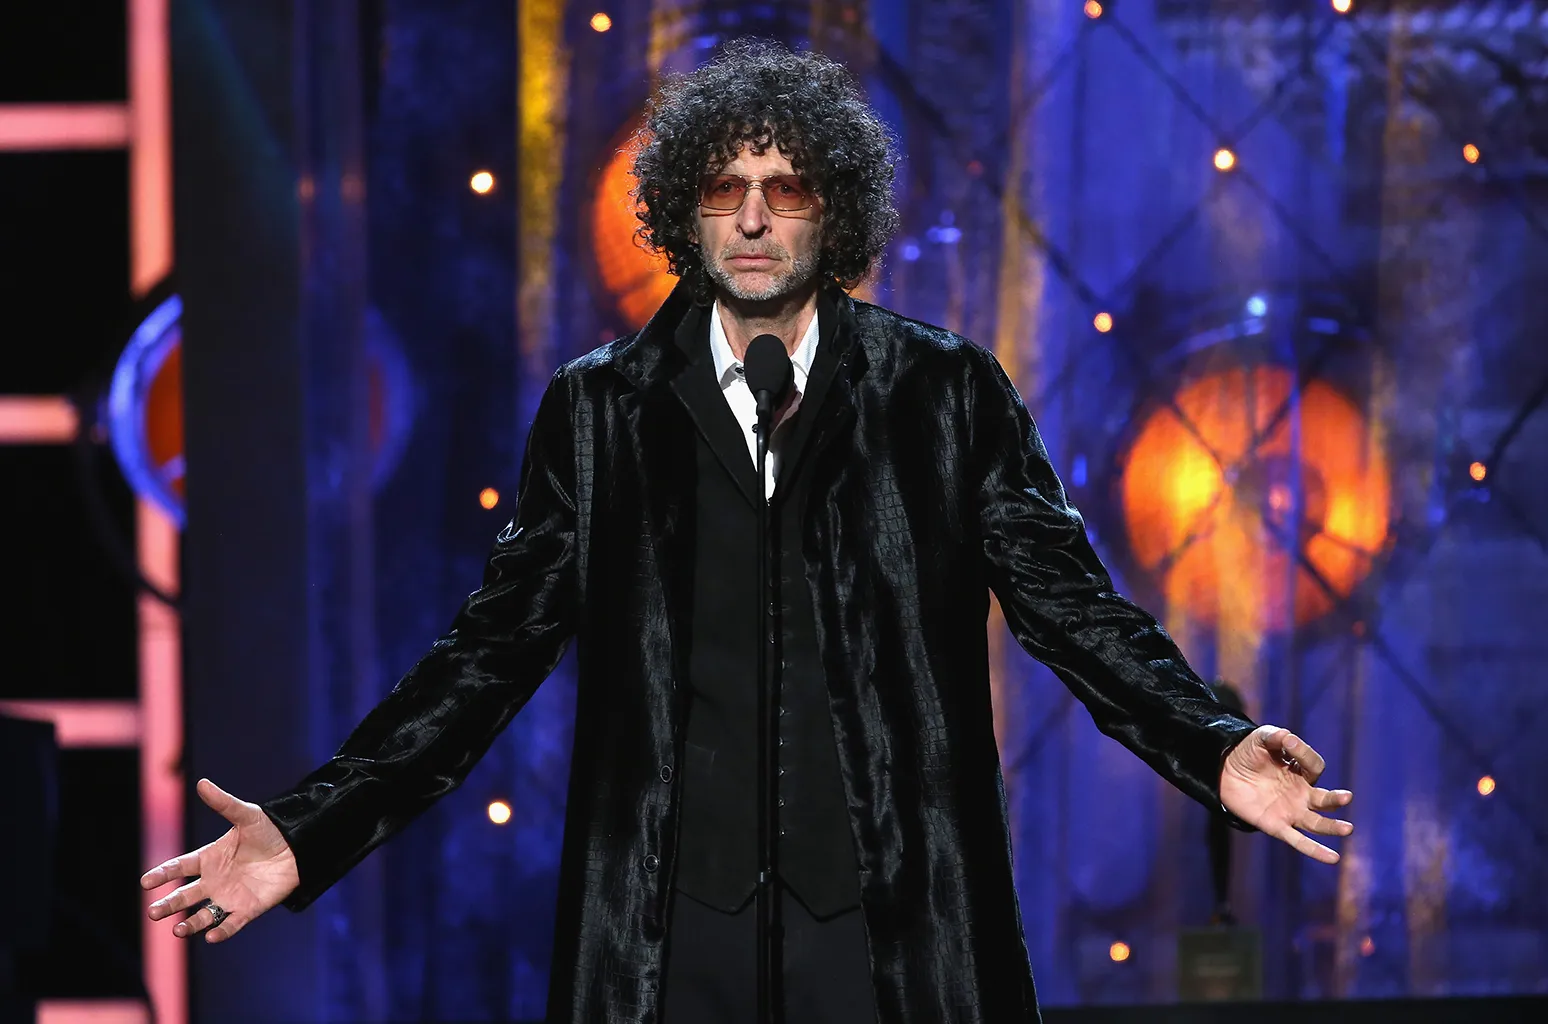 Howard stern doing his show, performing on stage